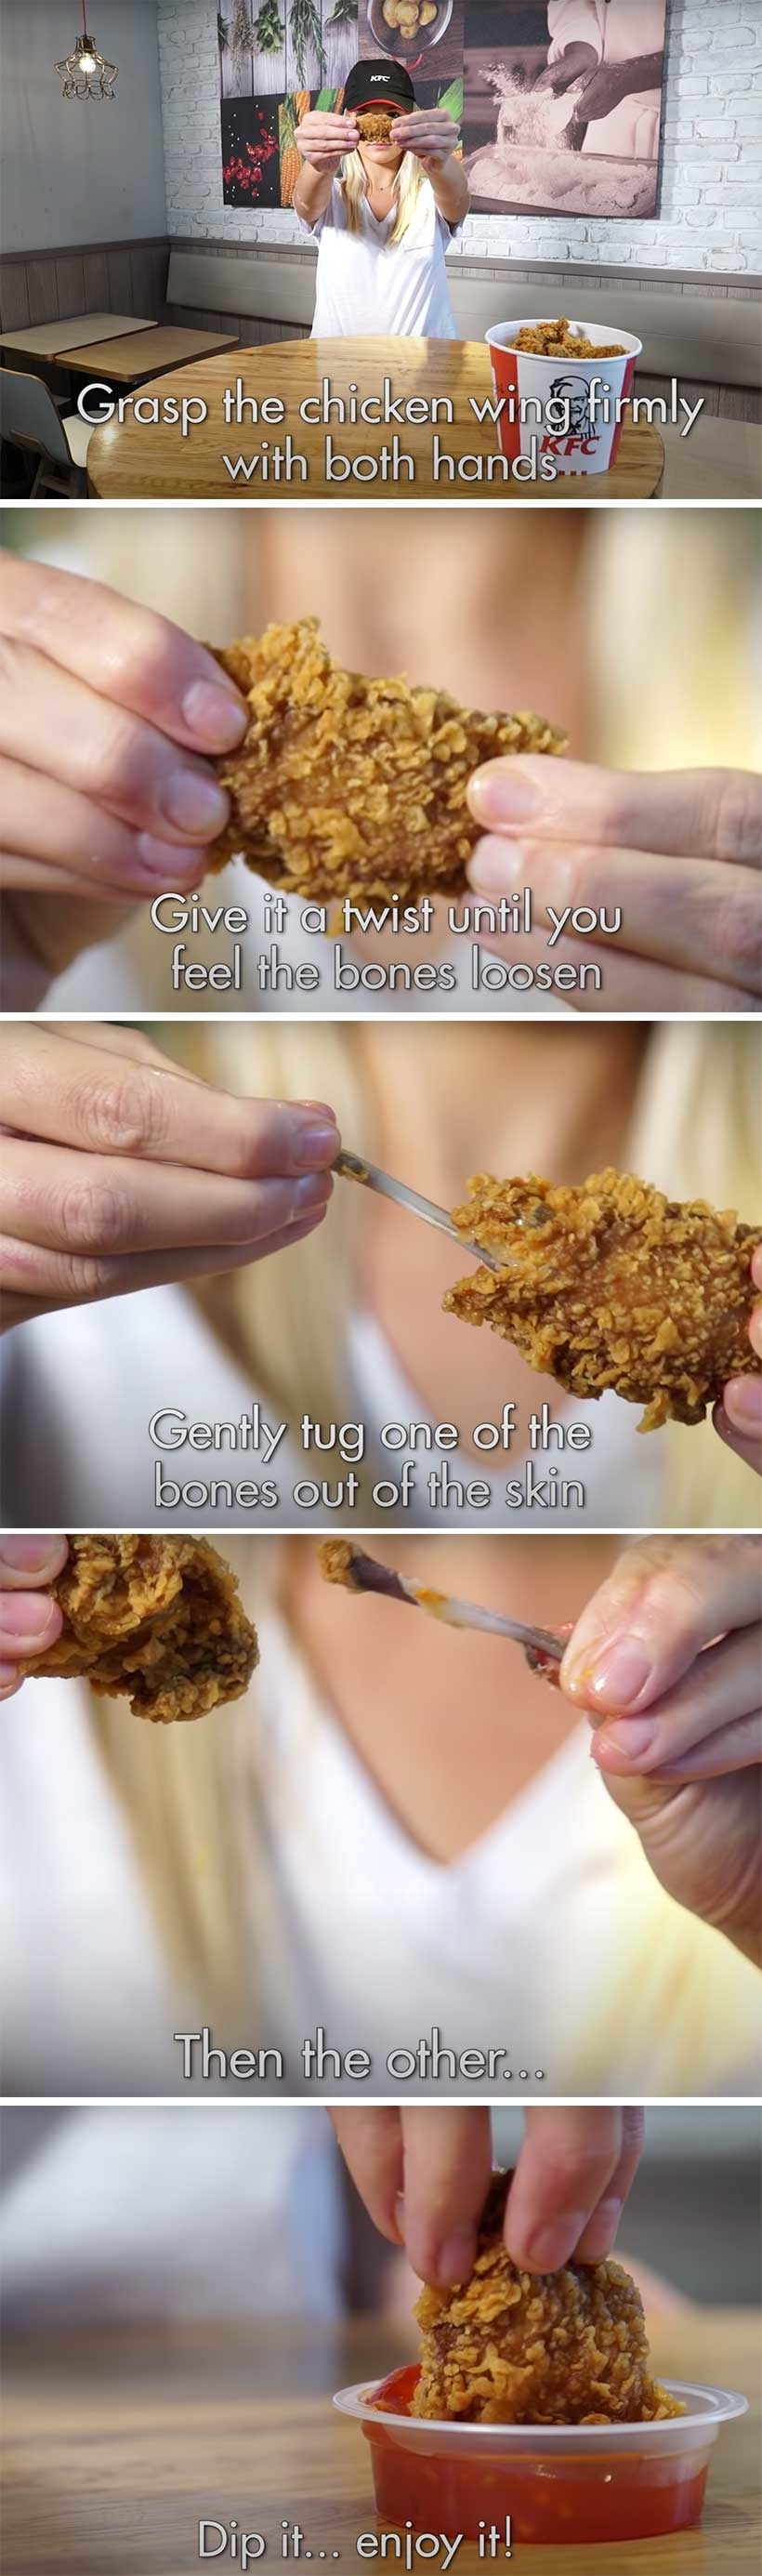 A woman removing bones from chicken